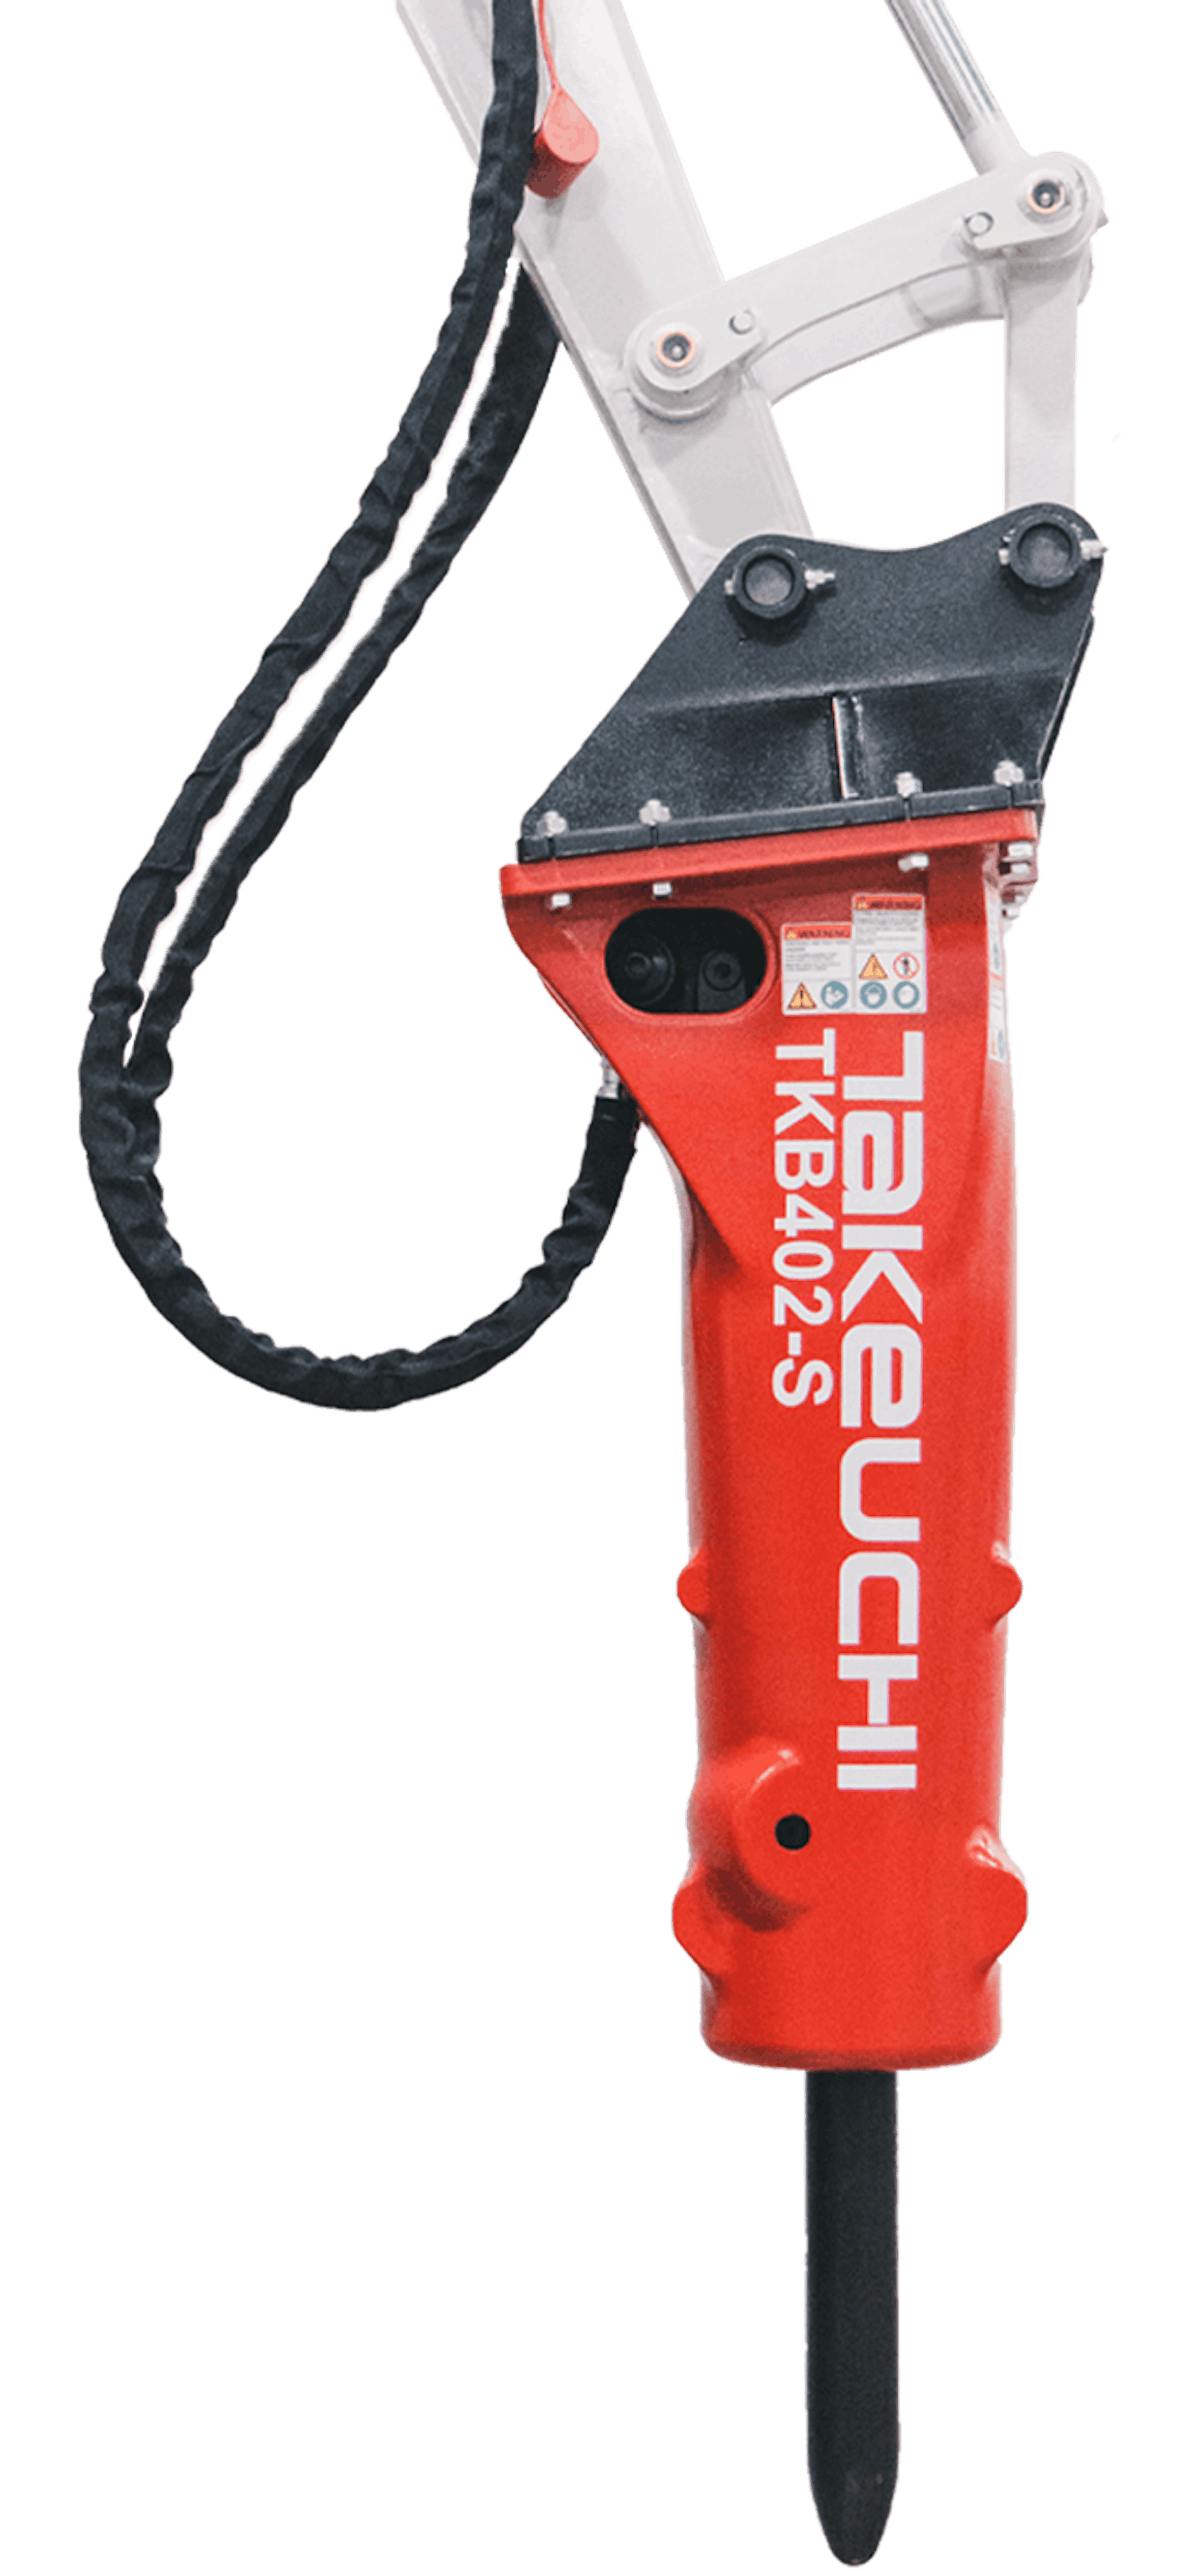 Takeuchi launches new line of hydraulic hammers | Equipment World